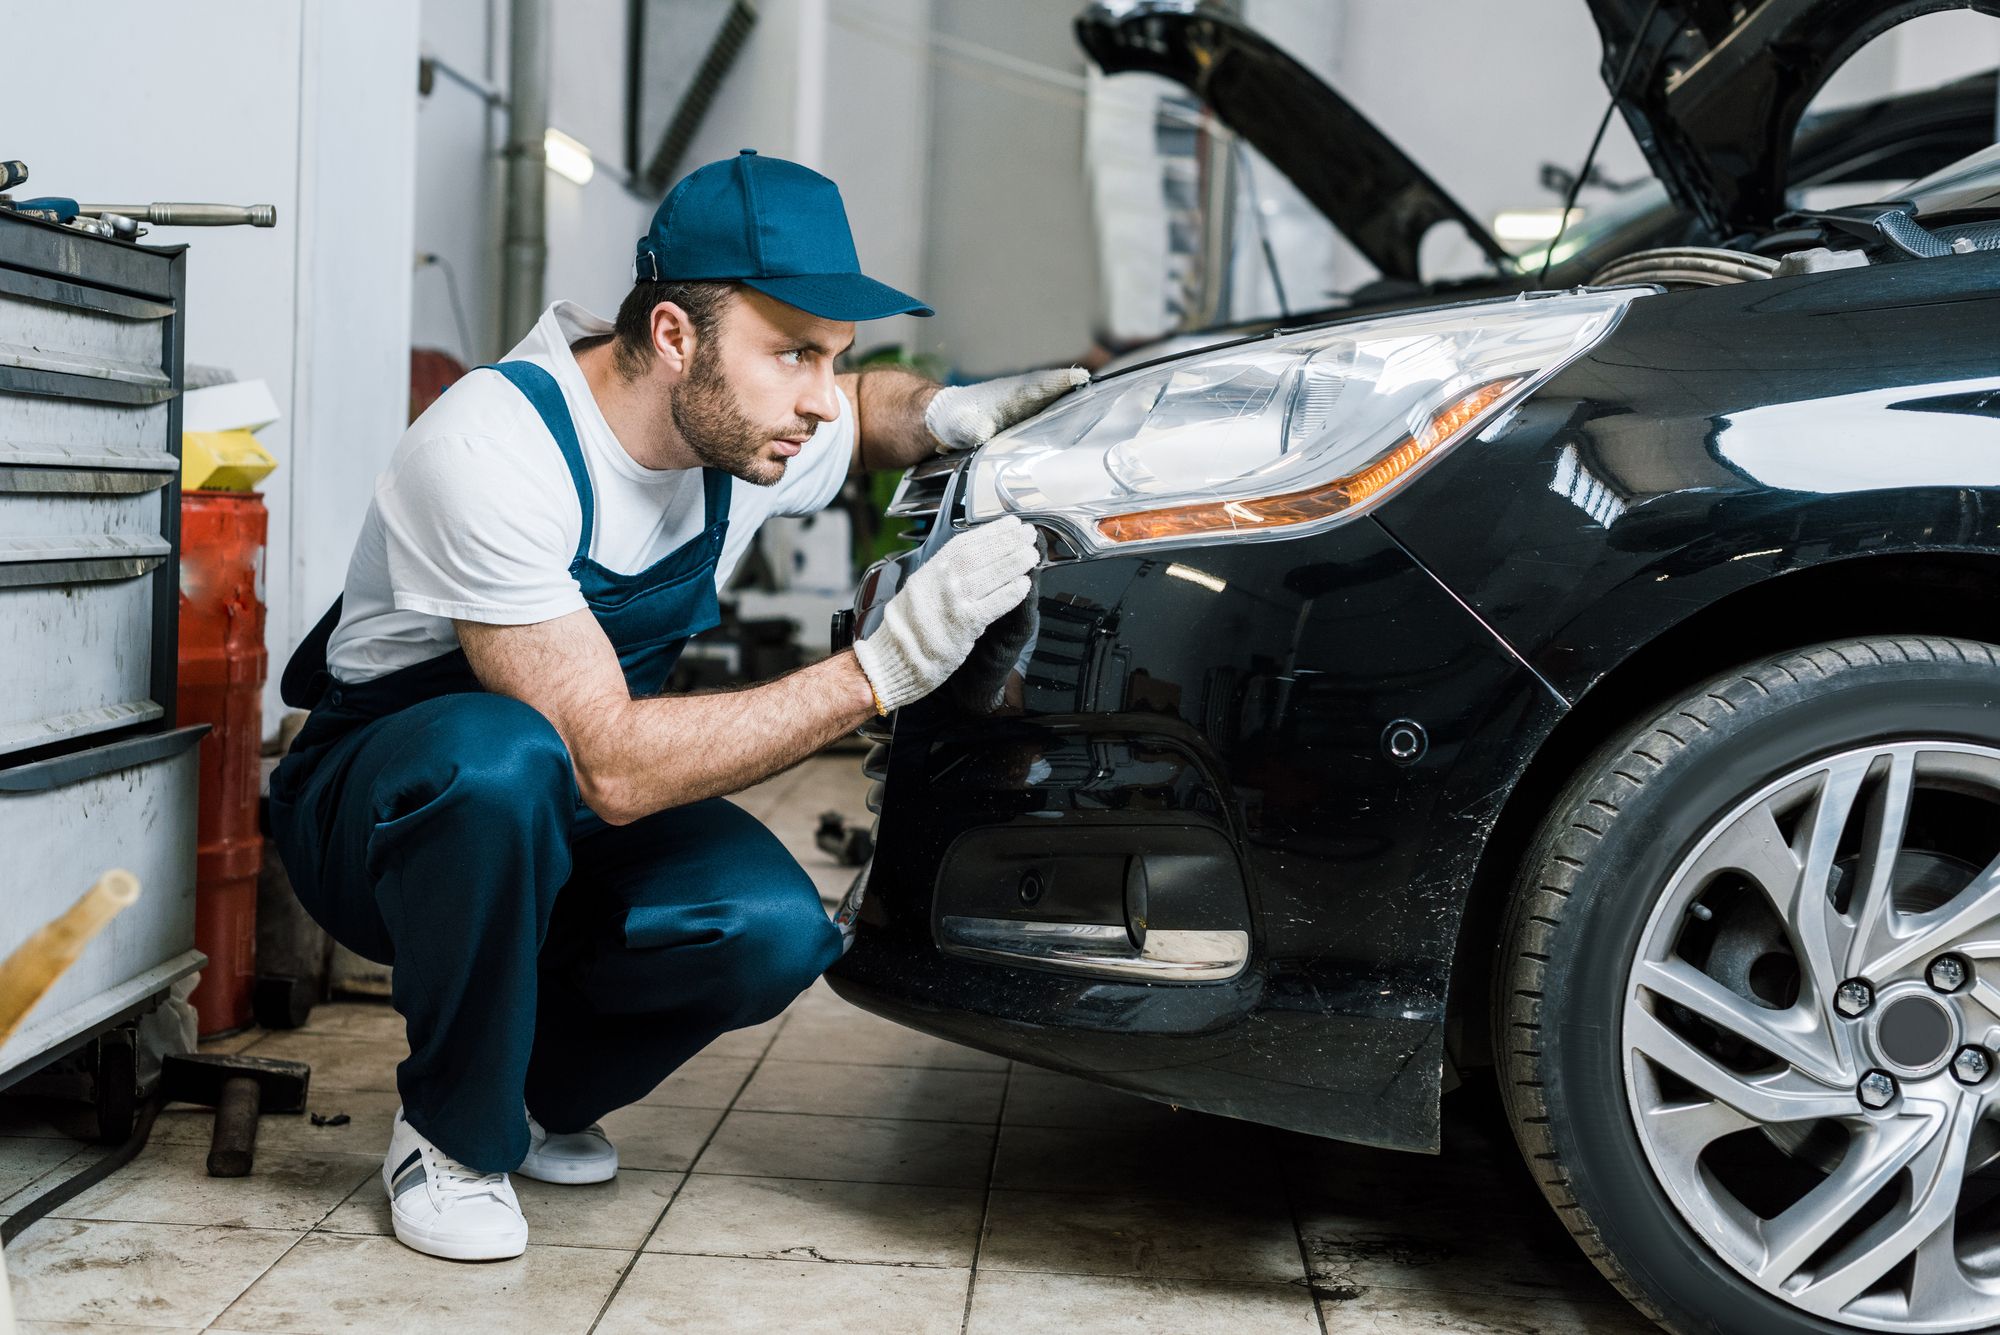 Auto Body Mechanics: Keeping Our Vehicles Safe and Roadworthy